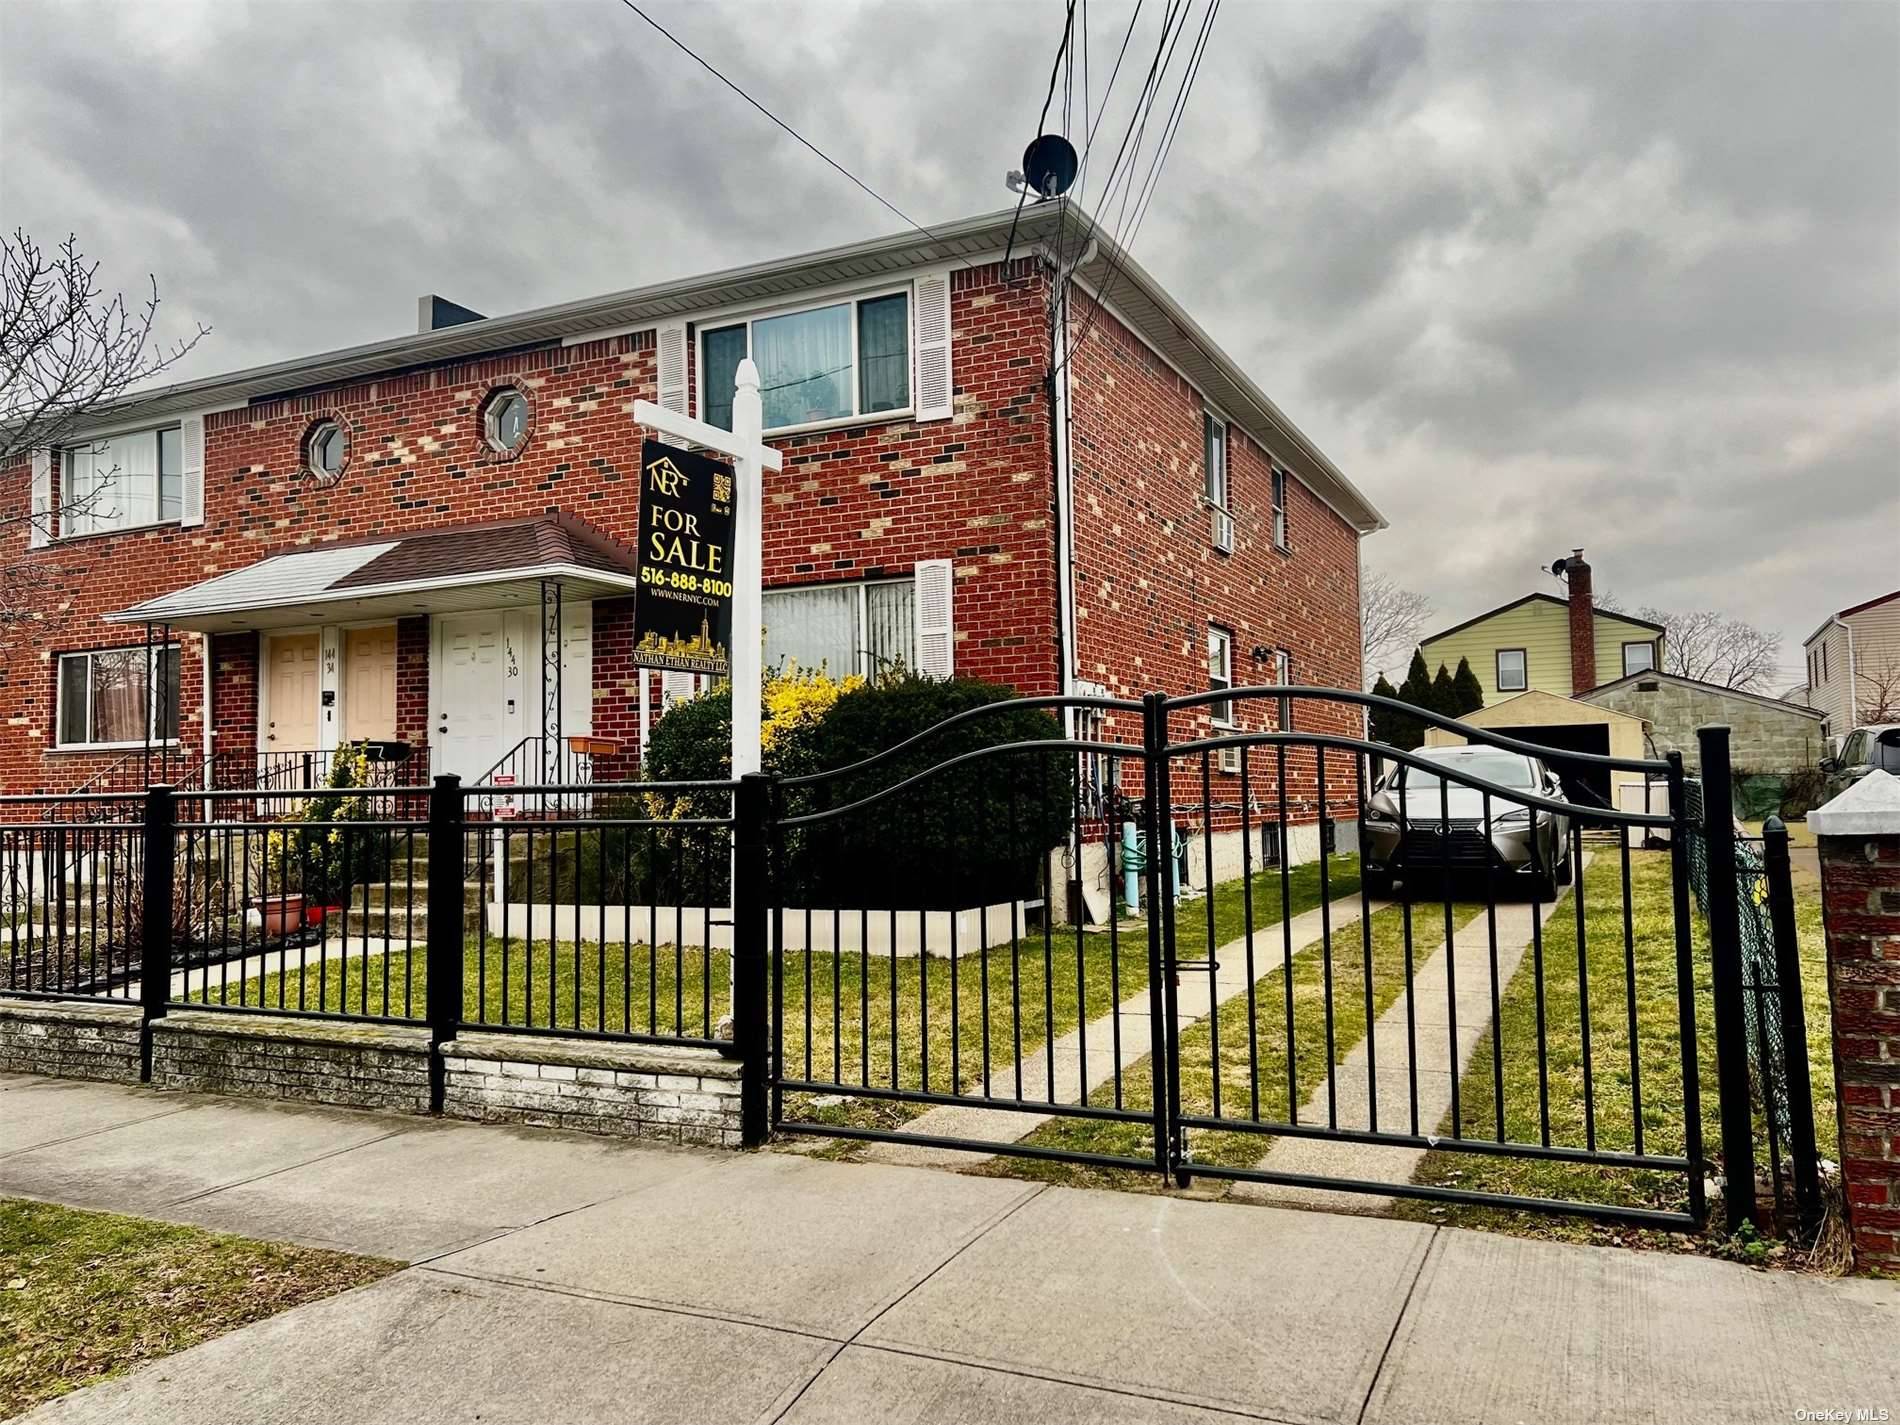 Large 2 family 100 brick move in ready with Full Finish Basement 40X100 lot with lots of yard space and Private parking for any kind of vehicle.